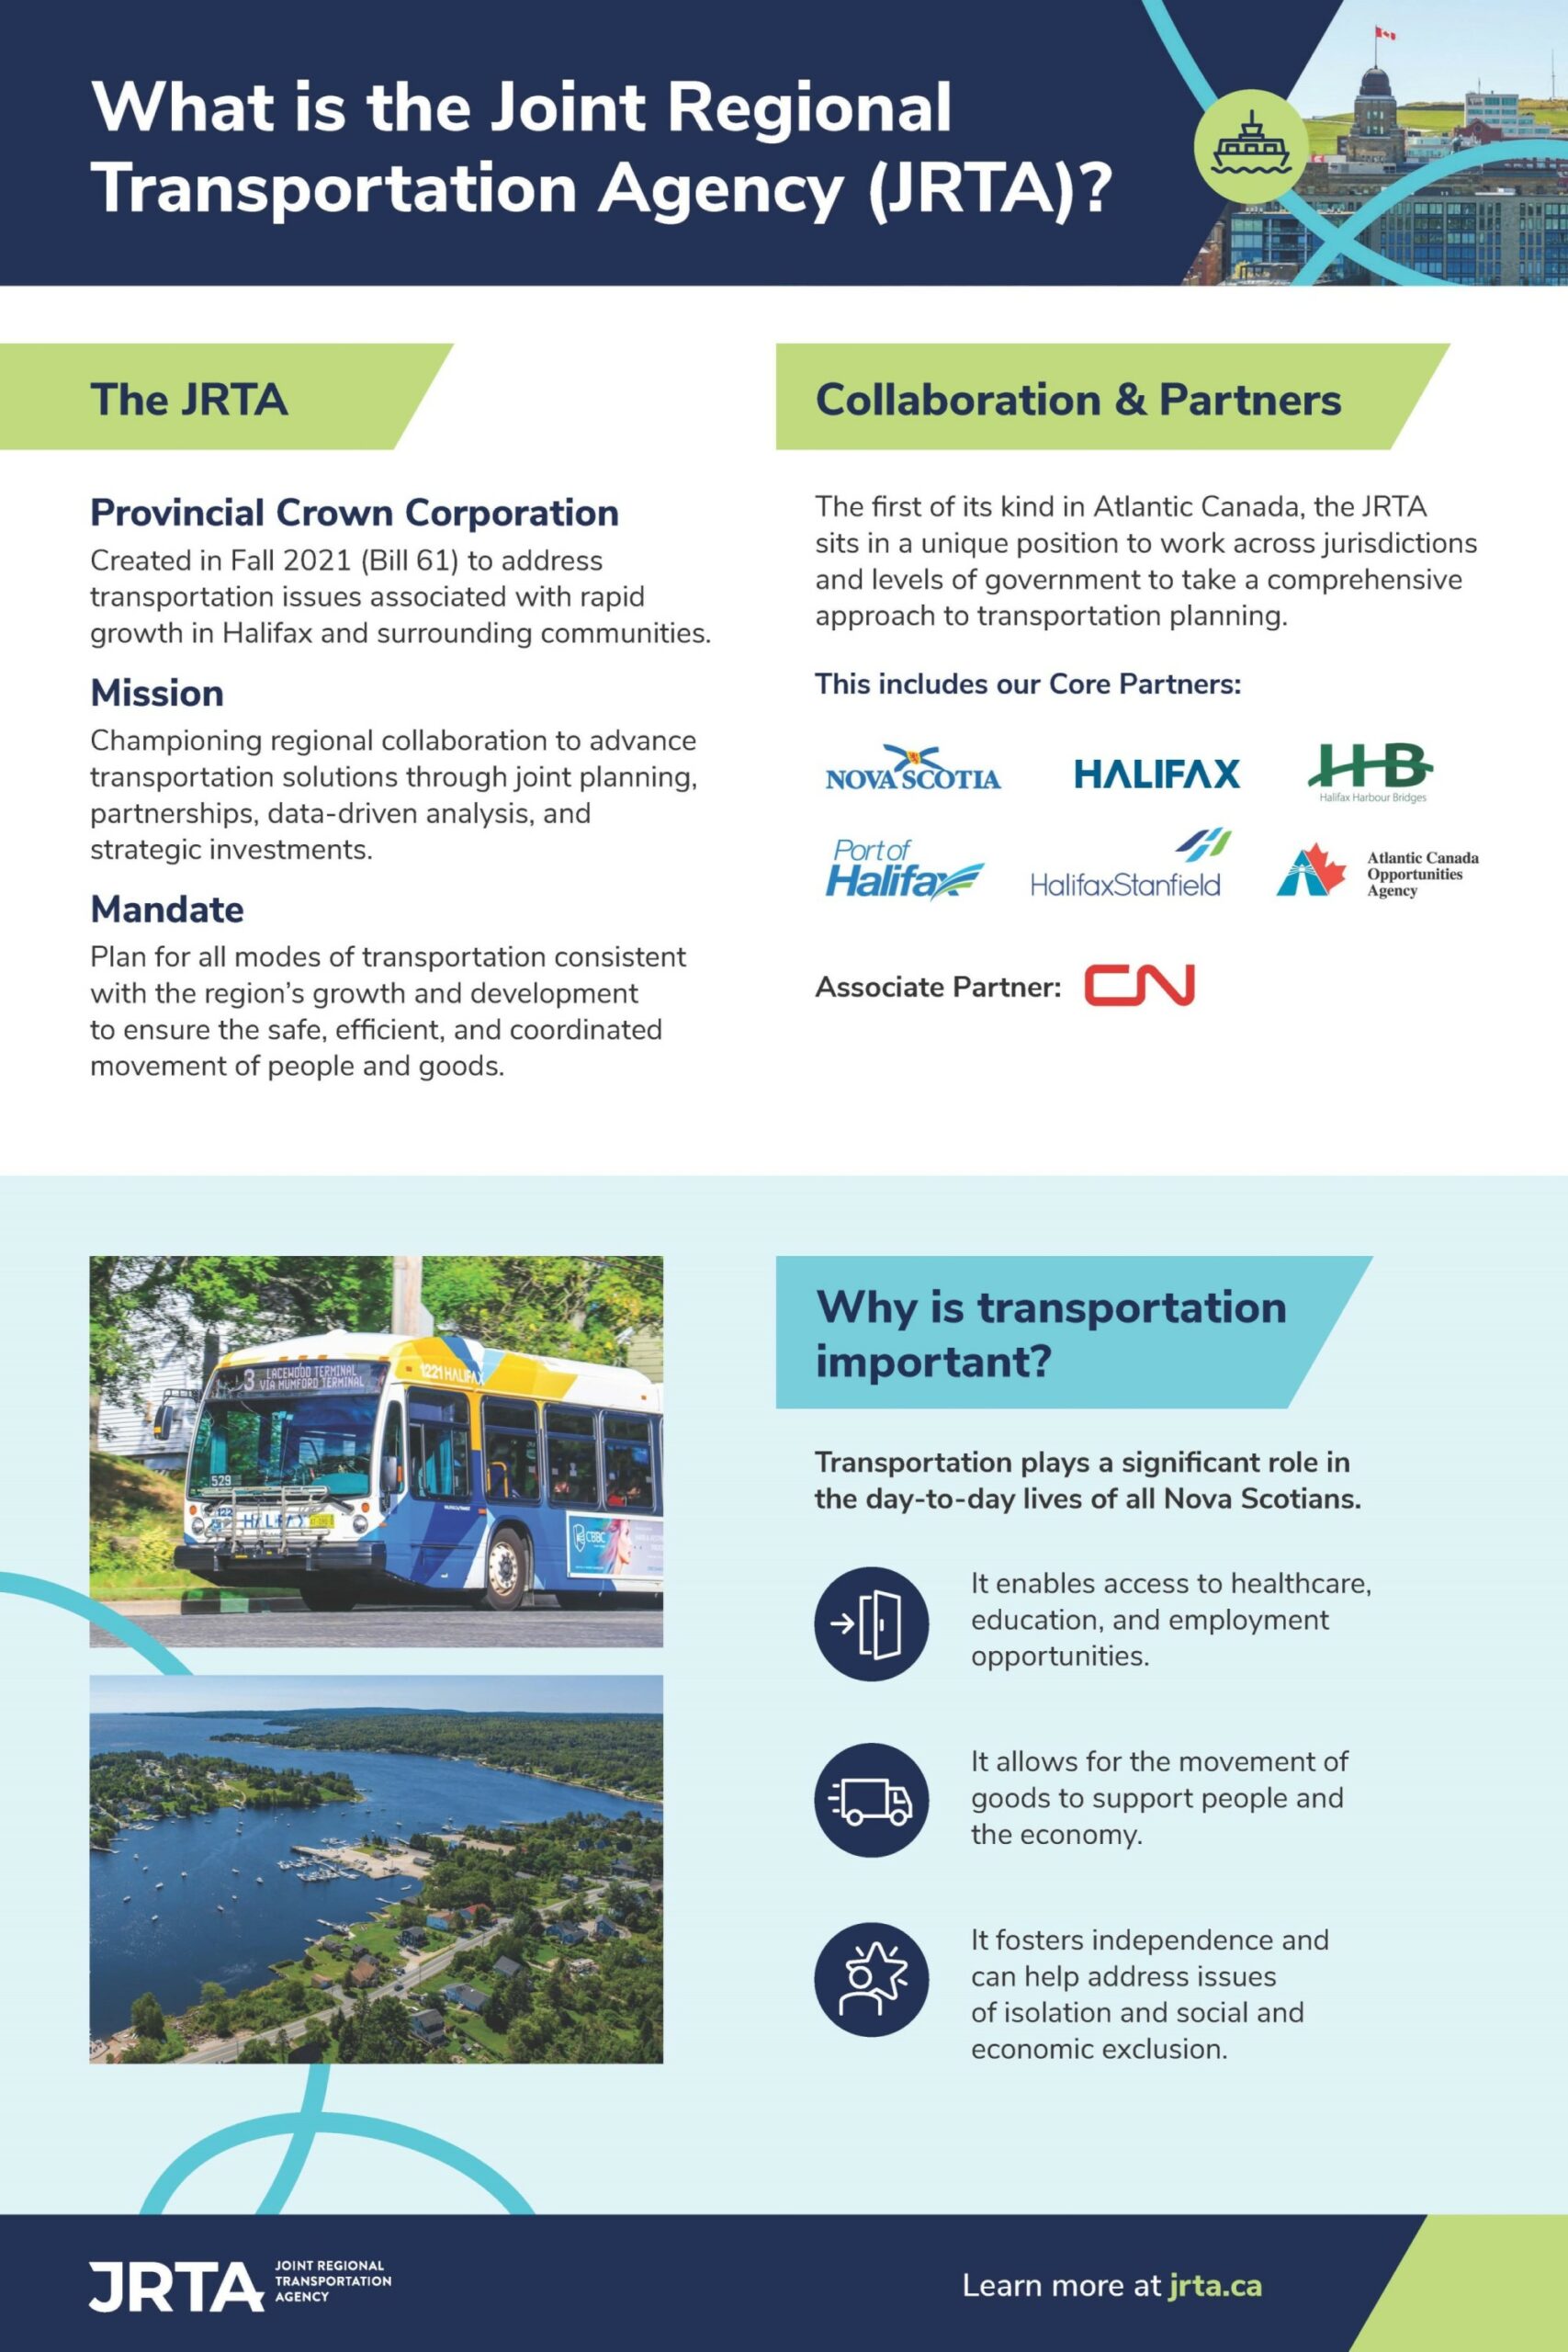 The JRTA Provincial Crown Corporation Created in Fall 2021 (Bill 61) to address transportation issues associated with rapid growth in Halifax and surrounding communities. Mission Championing regional collaboration to advance transportation solutions through joint planning, partnerships, data-driven analysis, and strategic investments. Mandate Plan for all modes of transportation consistent with the region’s growth and development to ensure the safe, efficient, and coordinated movement of people and goods. Collaboration and Partners The first of its kind in Atlantic Canada, the JRTA sits in a unique position to work across jurisdictions and levels of government to take a comprehensive approach to transportation planning. Why is transportation important? Transportation plays a significant role in the day-to-day lives of all Nova Scotians It enables access to healthcare, education, and employment opportunities. It allows for the movement of goods to support people and the economy. It fosters independence and can help address issues of isolation and social and economic exclusion.